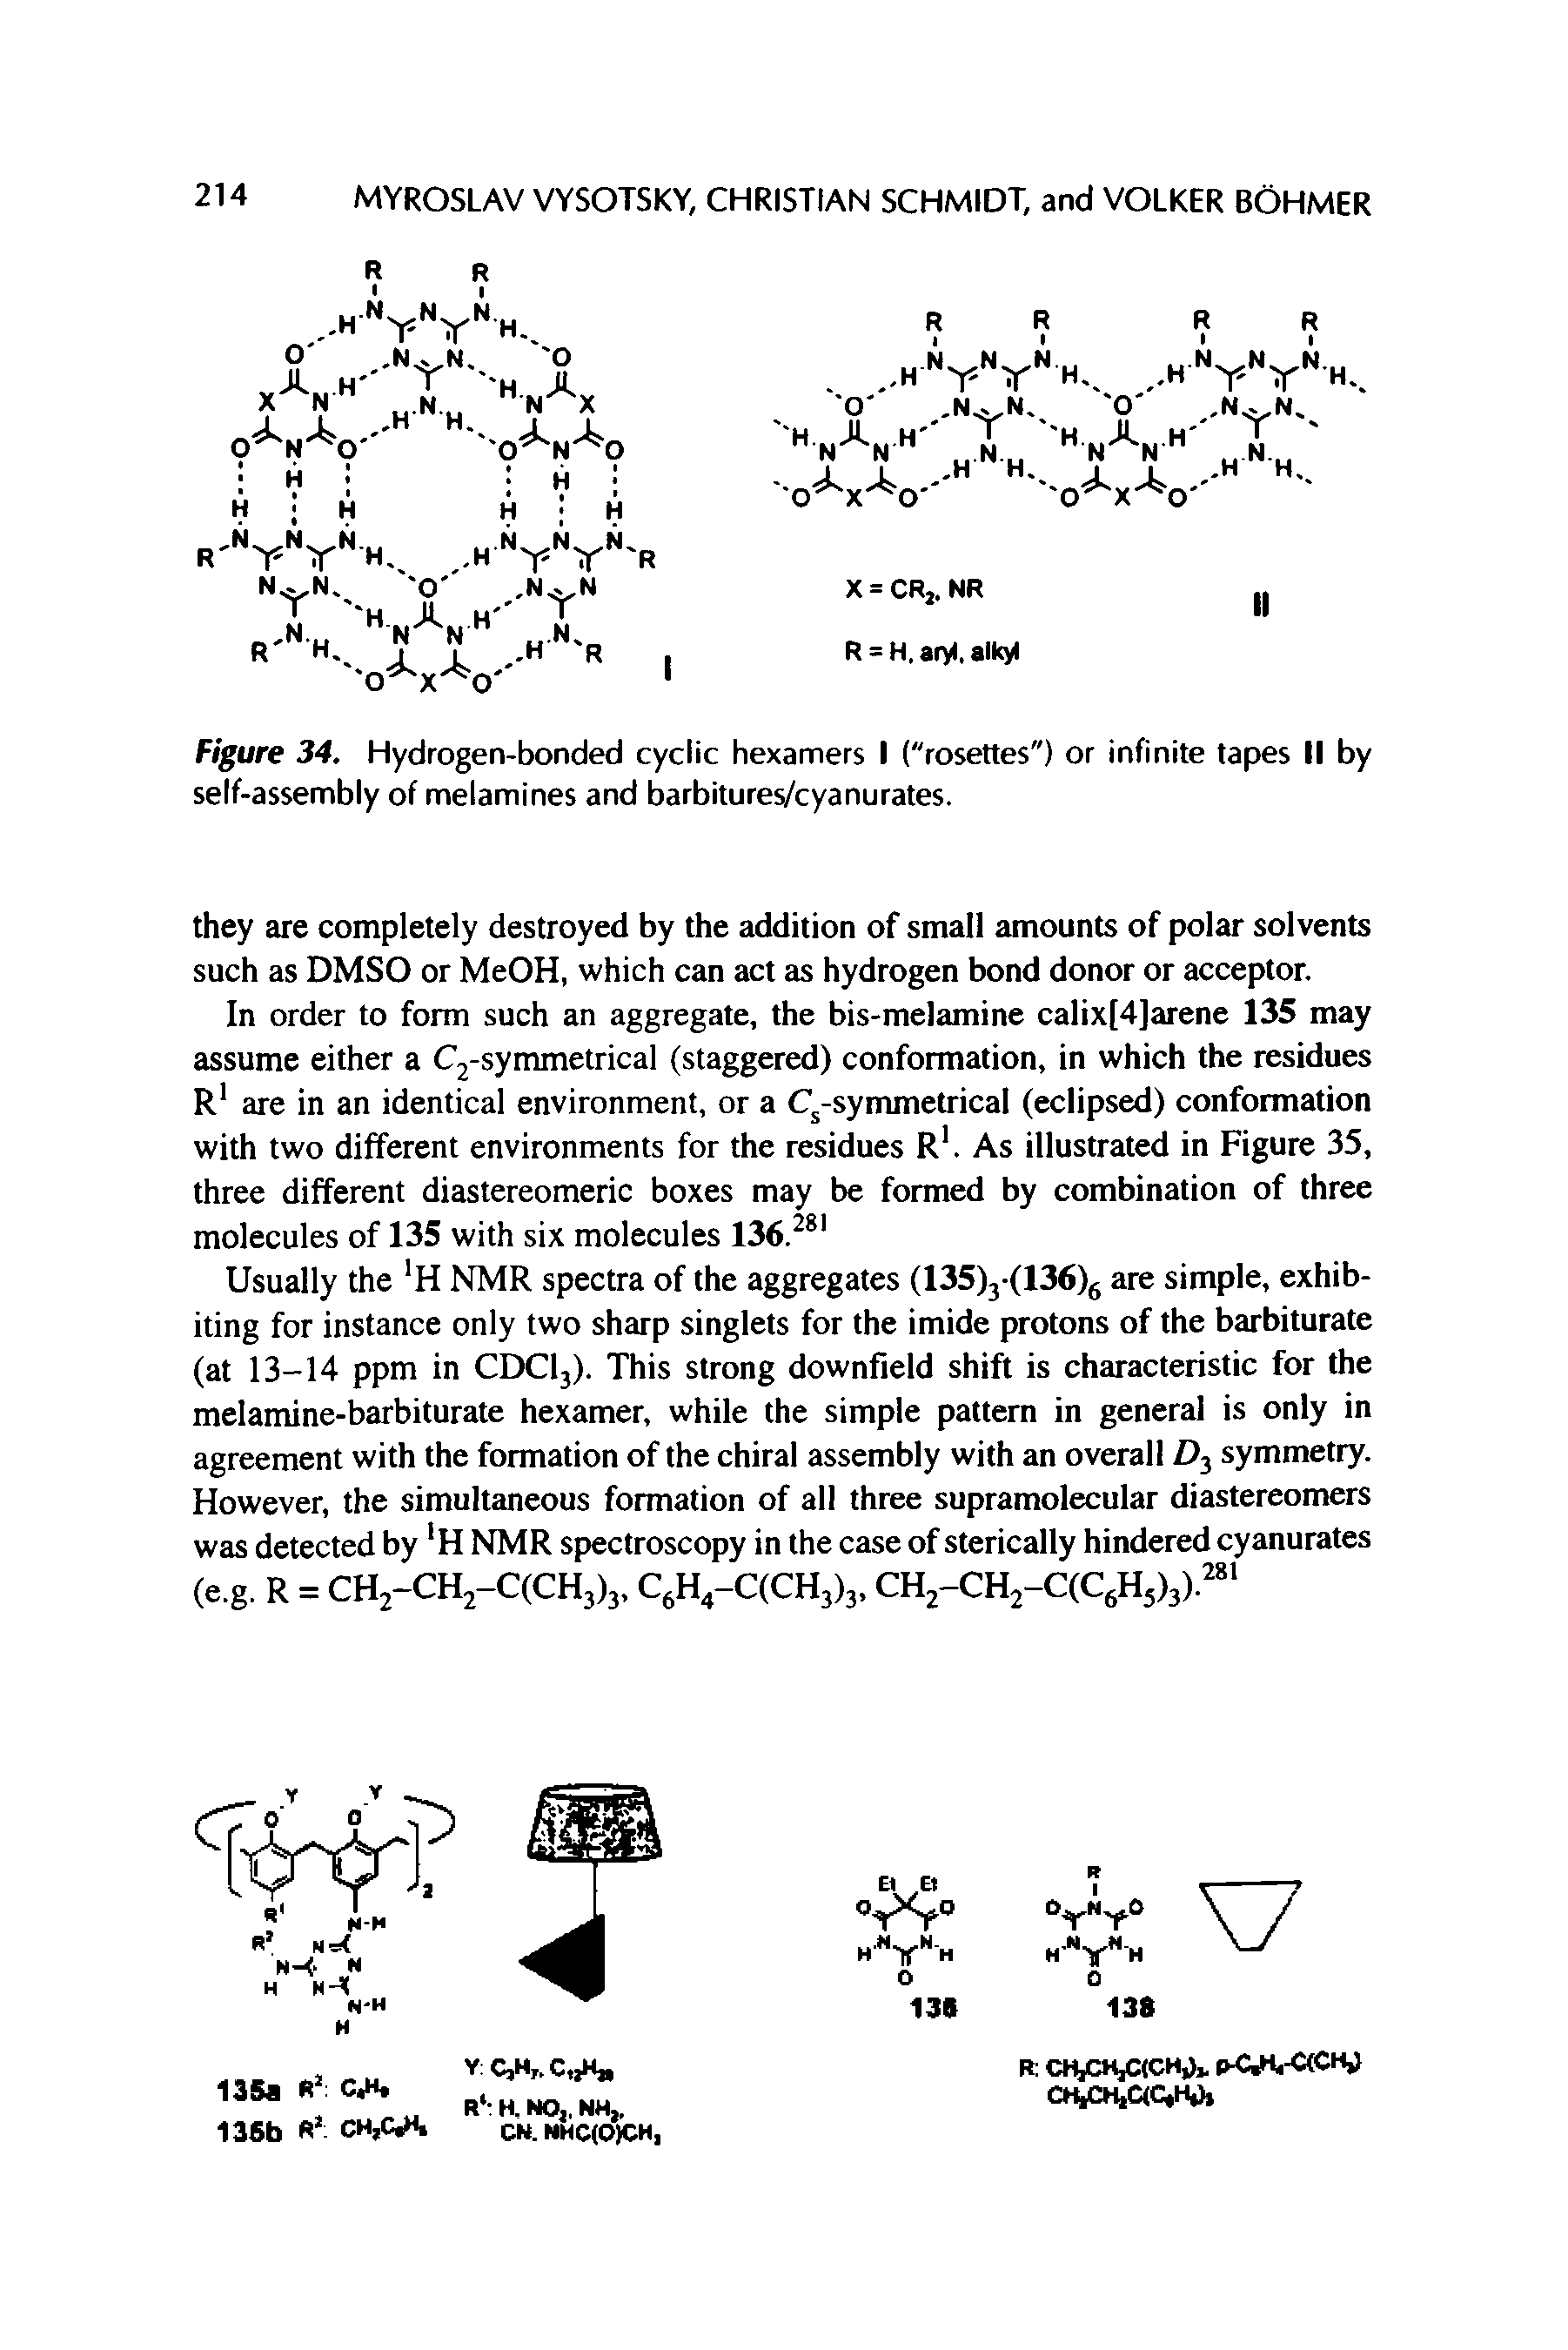 Figure 34. Hydrogen-bonded cyclic hexamers I ("rosettes") or infinite tapes II by self-assembly of melamines and barbitures/cyanurates.